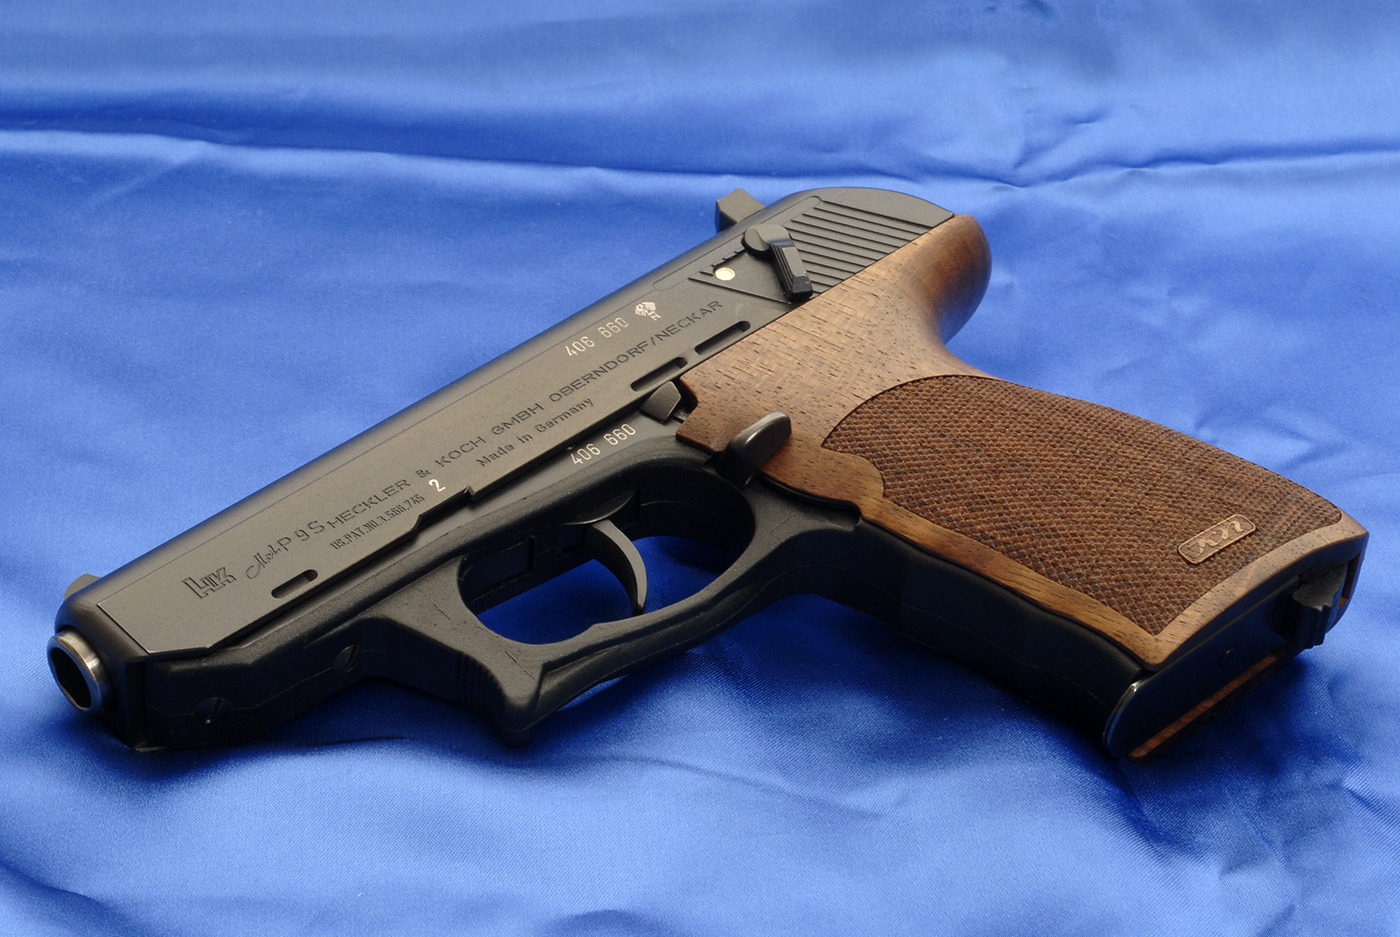 Heckler & Koch P9S Combat (.45 Auto) with Nill grips.